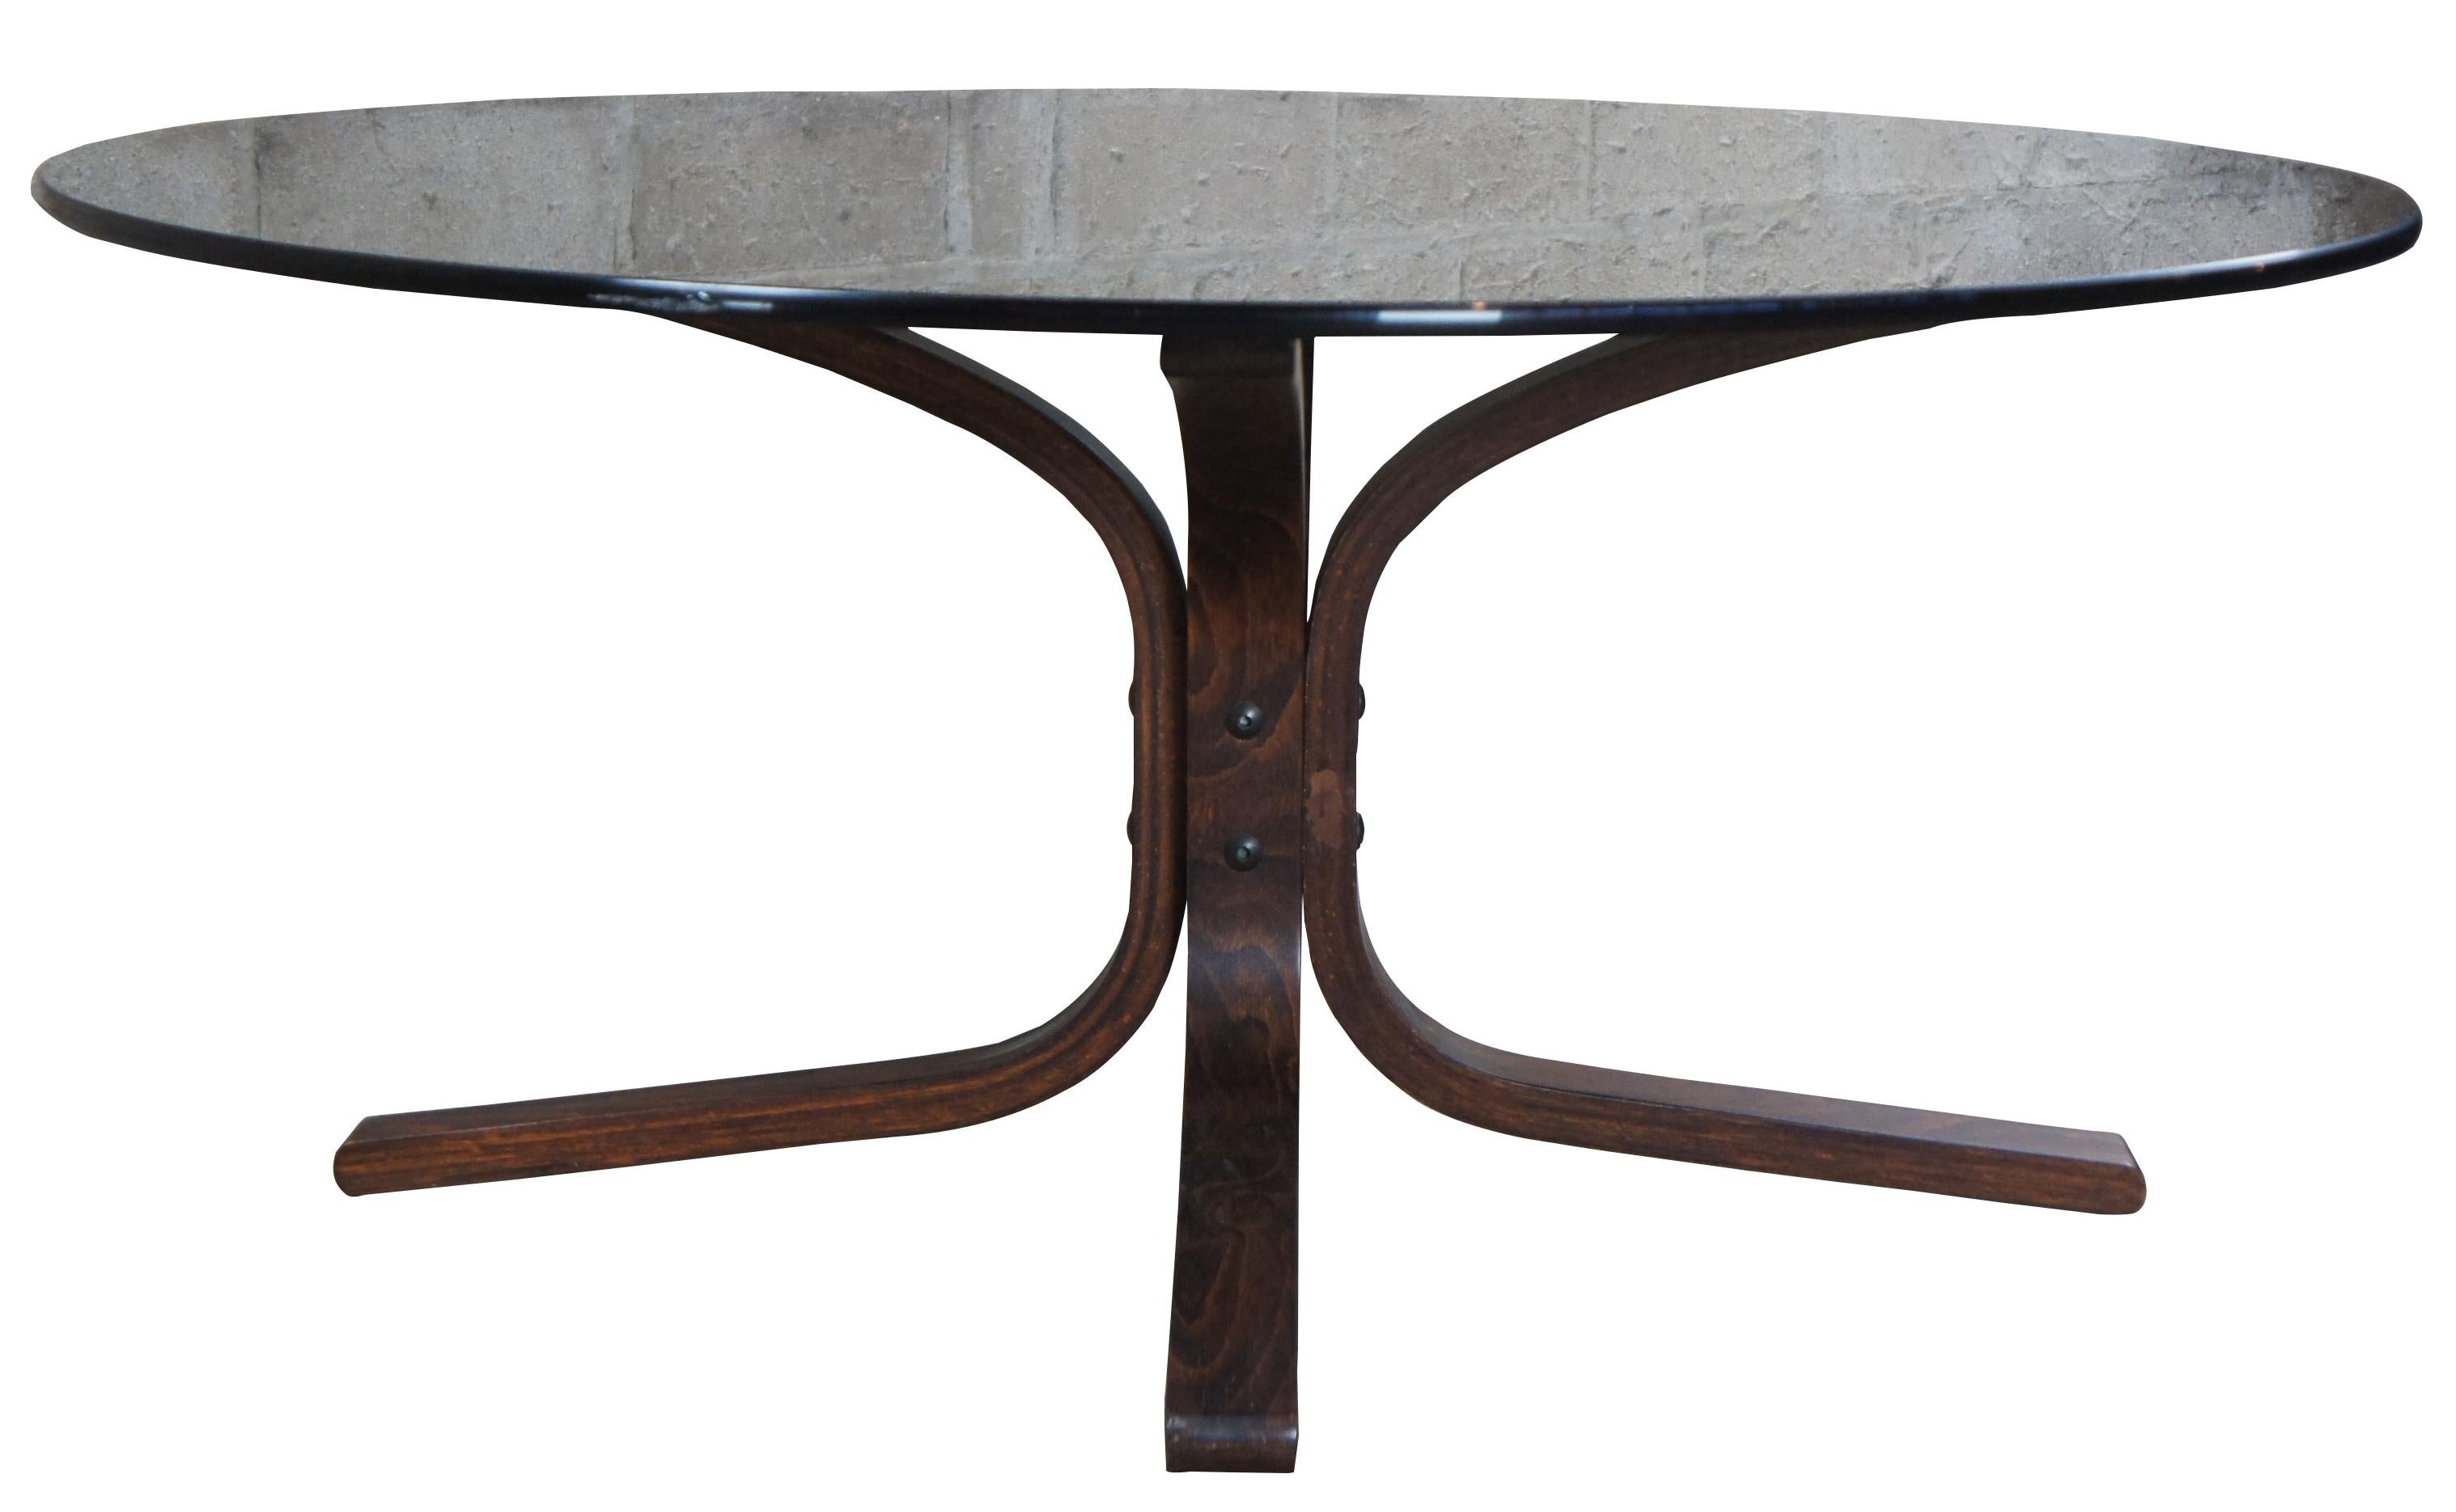 Ingmar Relling for Westnofa Siesta coffee table, circa 1960s. Features a smoked glass top over a teak bentwood base.
   